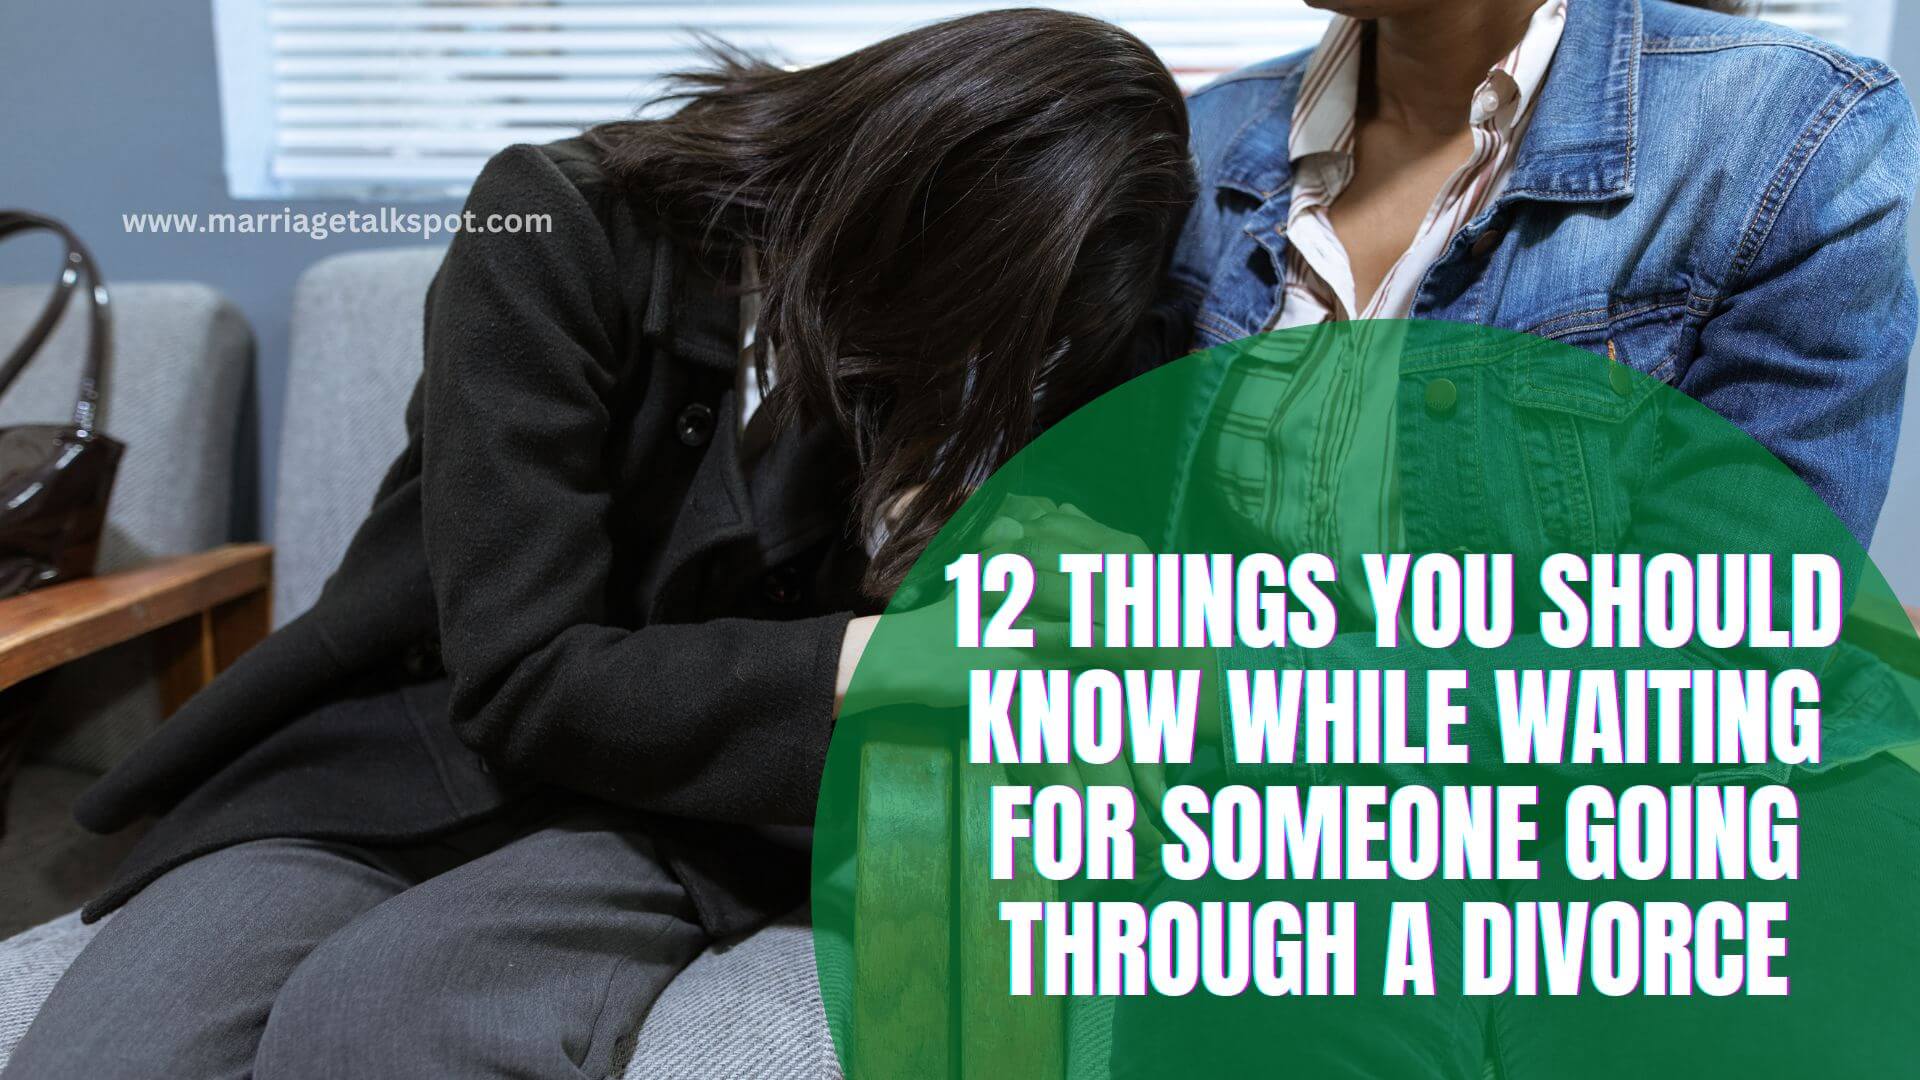 12 THINGS YOU SHOULD KNOW WHILE WAITING FOR SOMEONE GOING THROUGH A DIVORCE